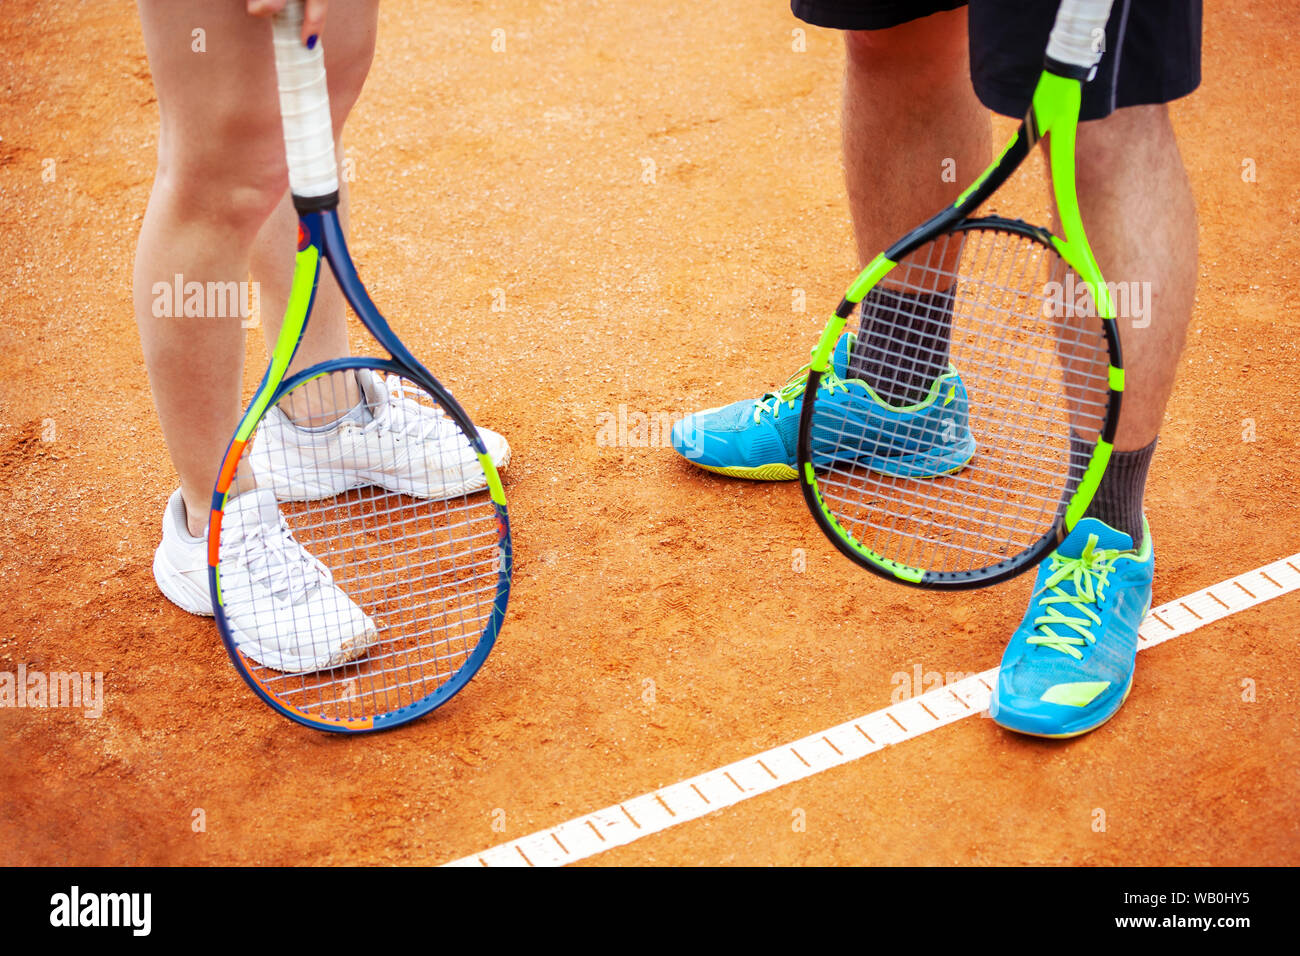 Closeup of tennis players holding rackets ready to play tennis. Stock Photo